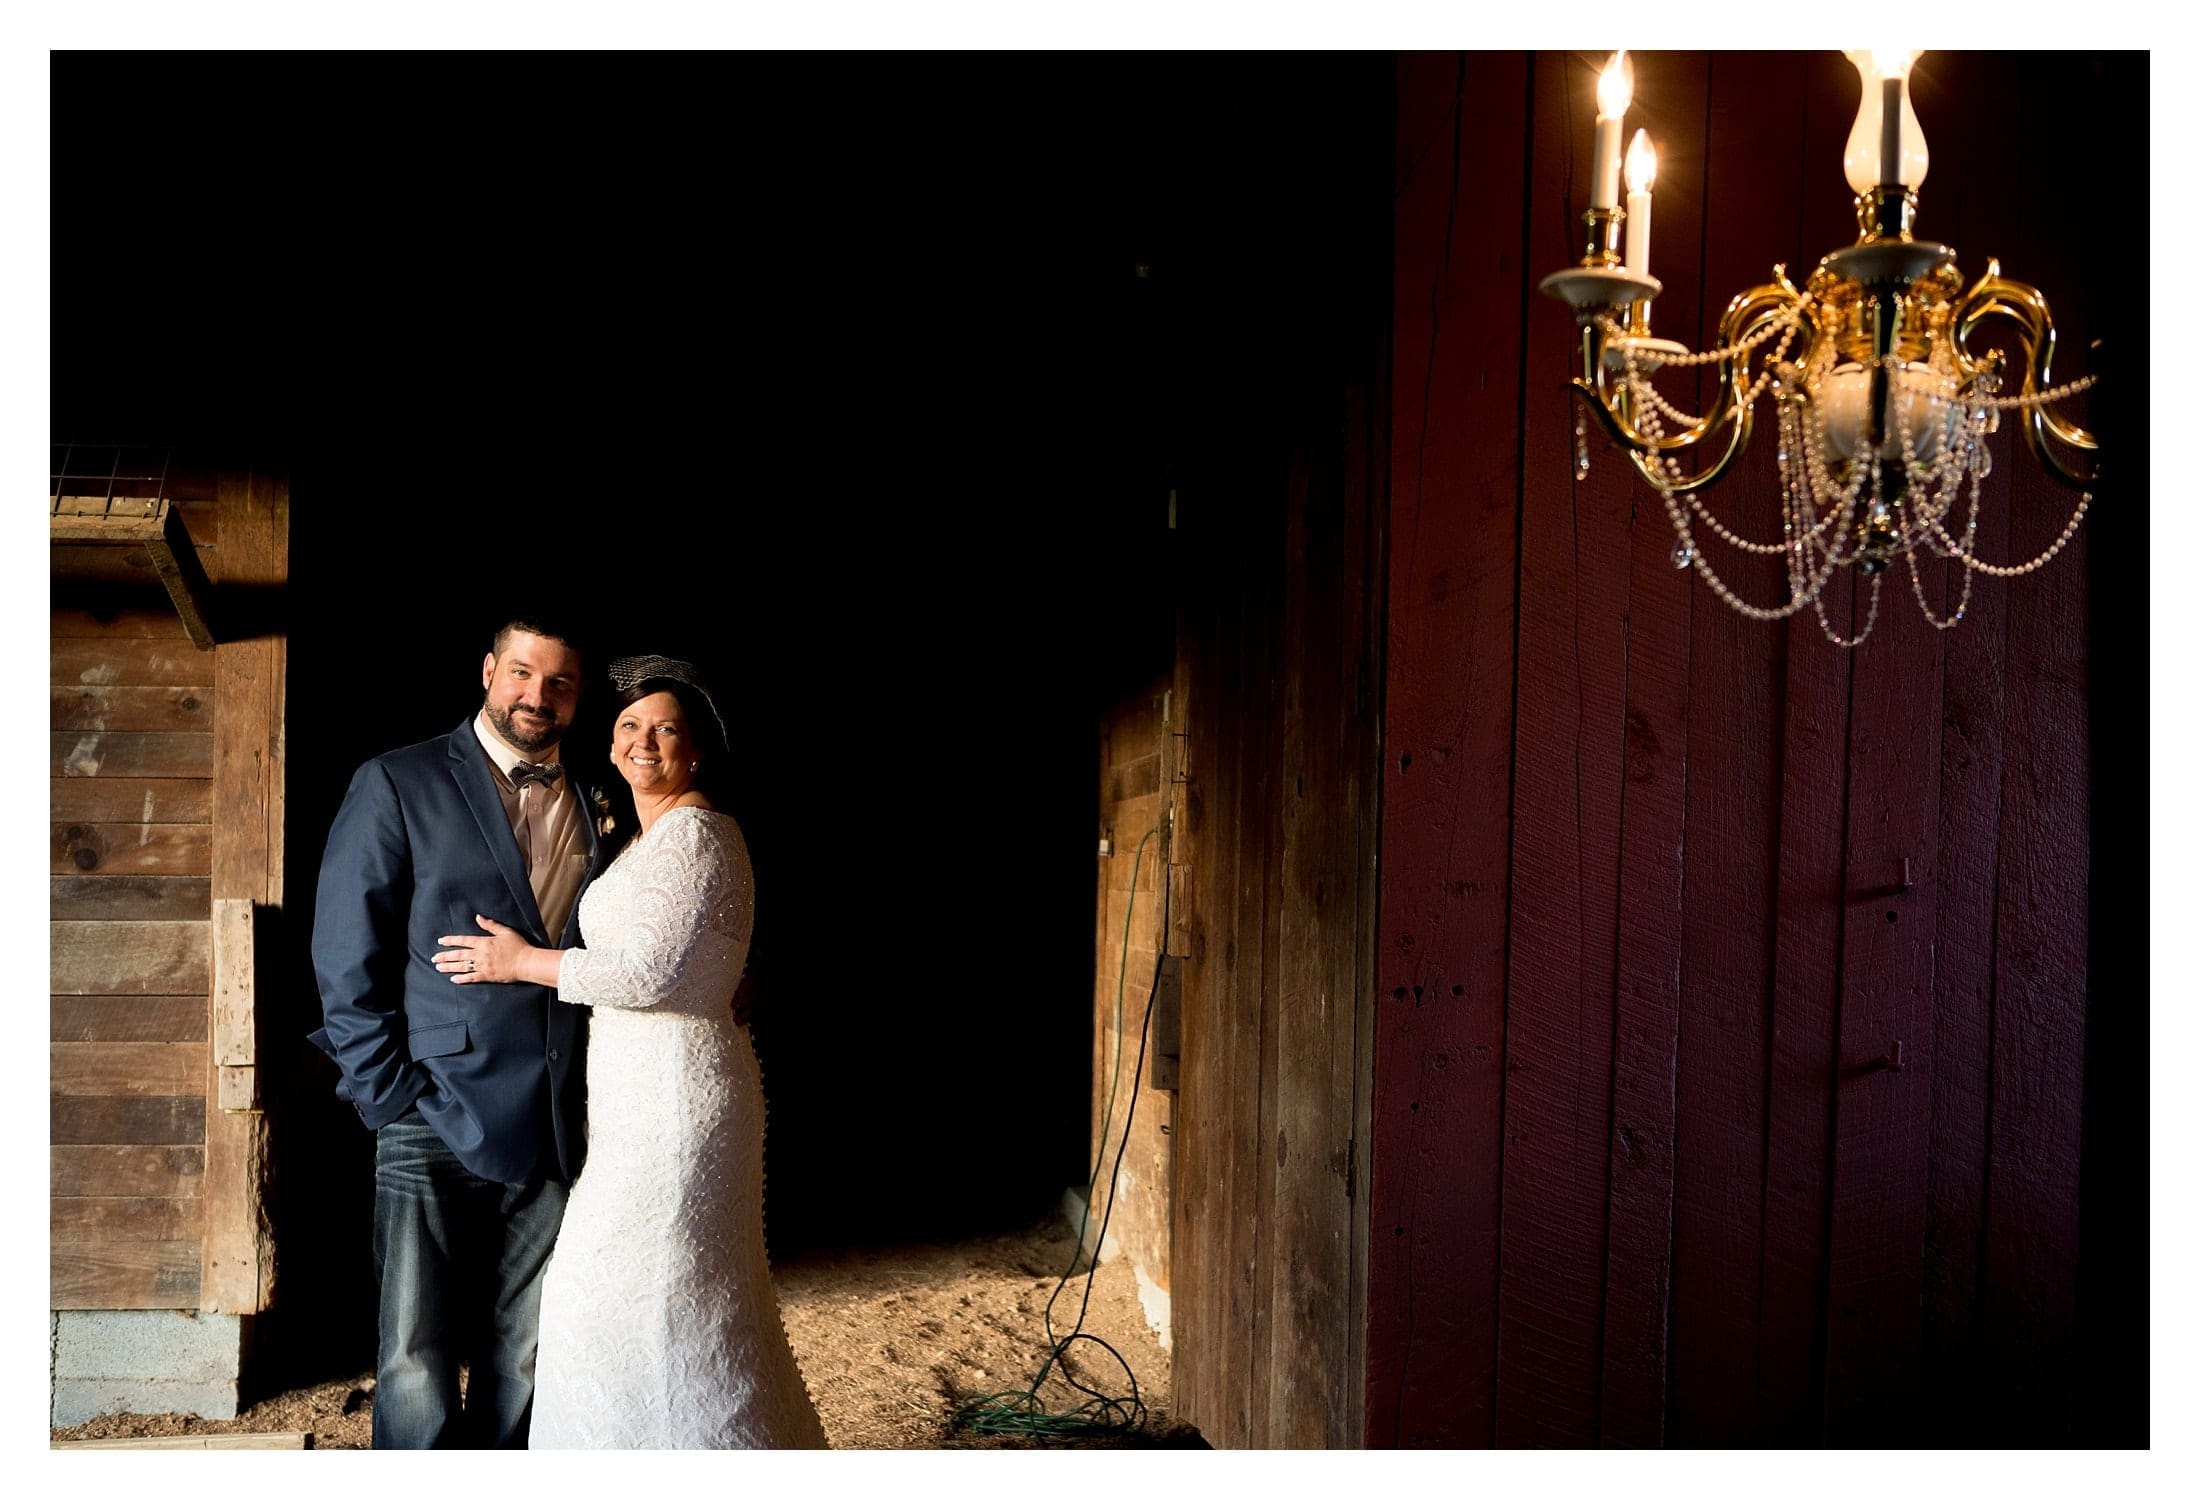 Couple in barn with chandelier